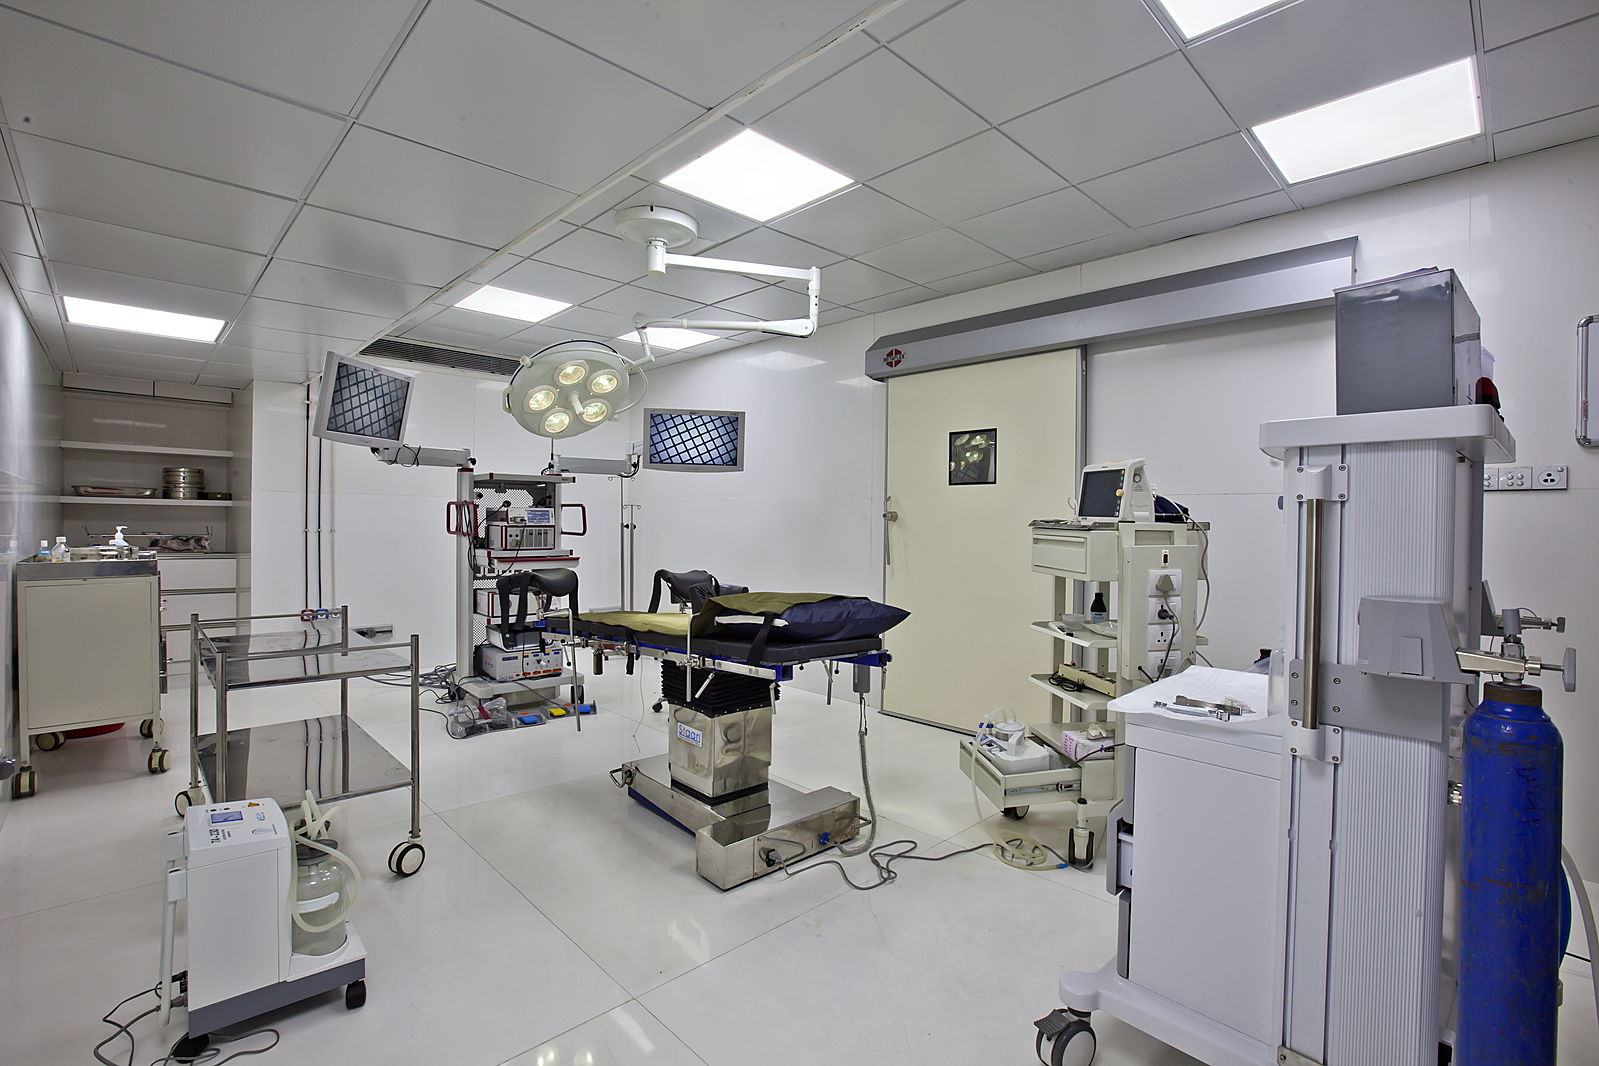 Image is of a well-lit, sterile medical operating room. 